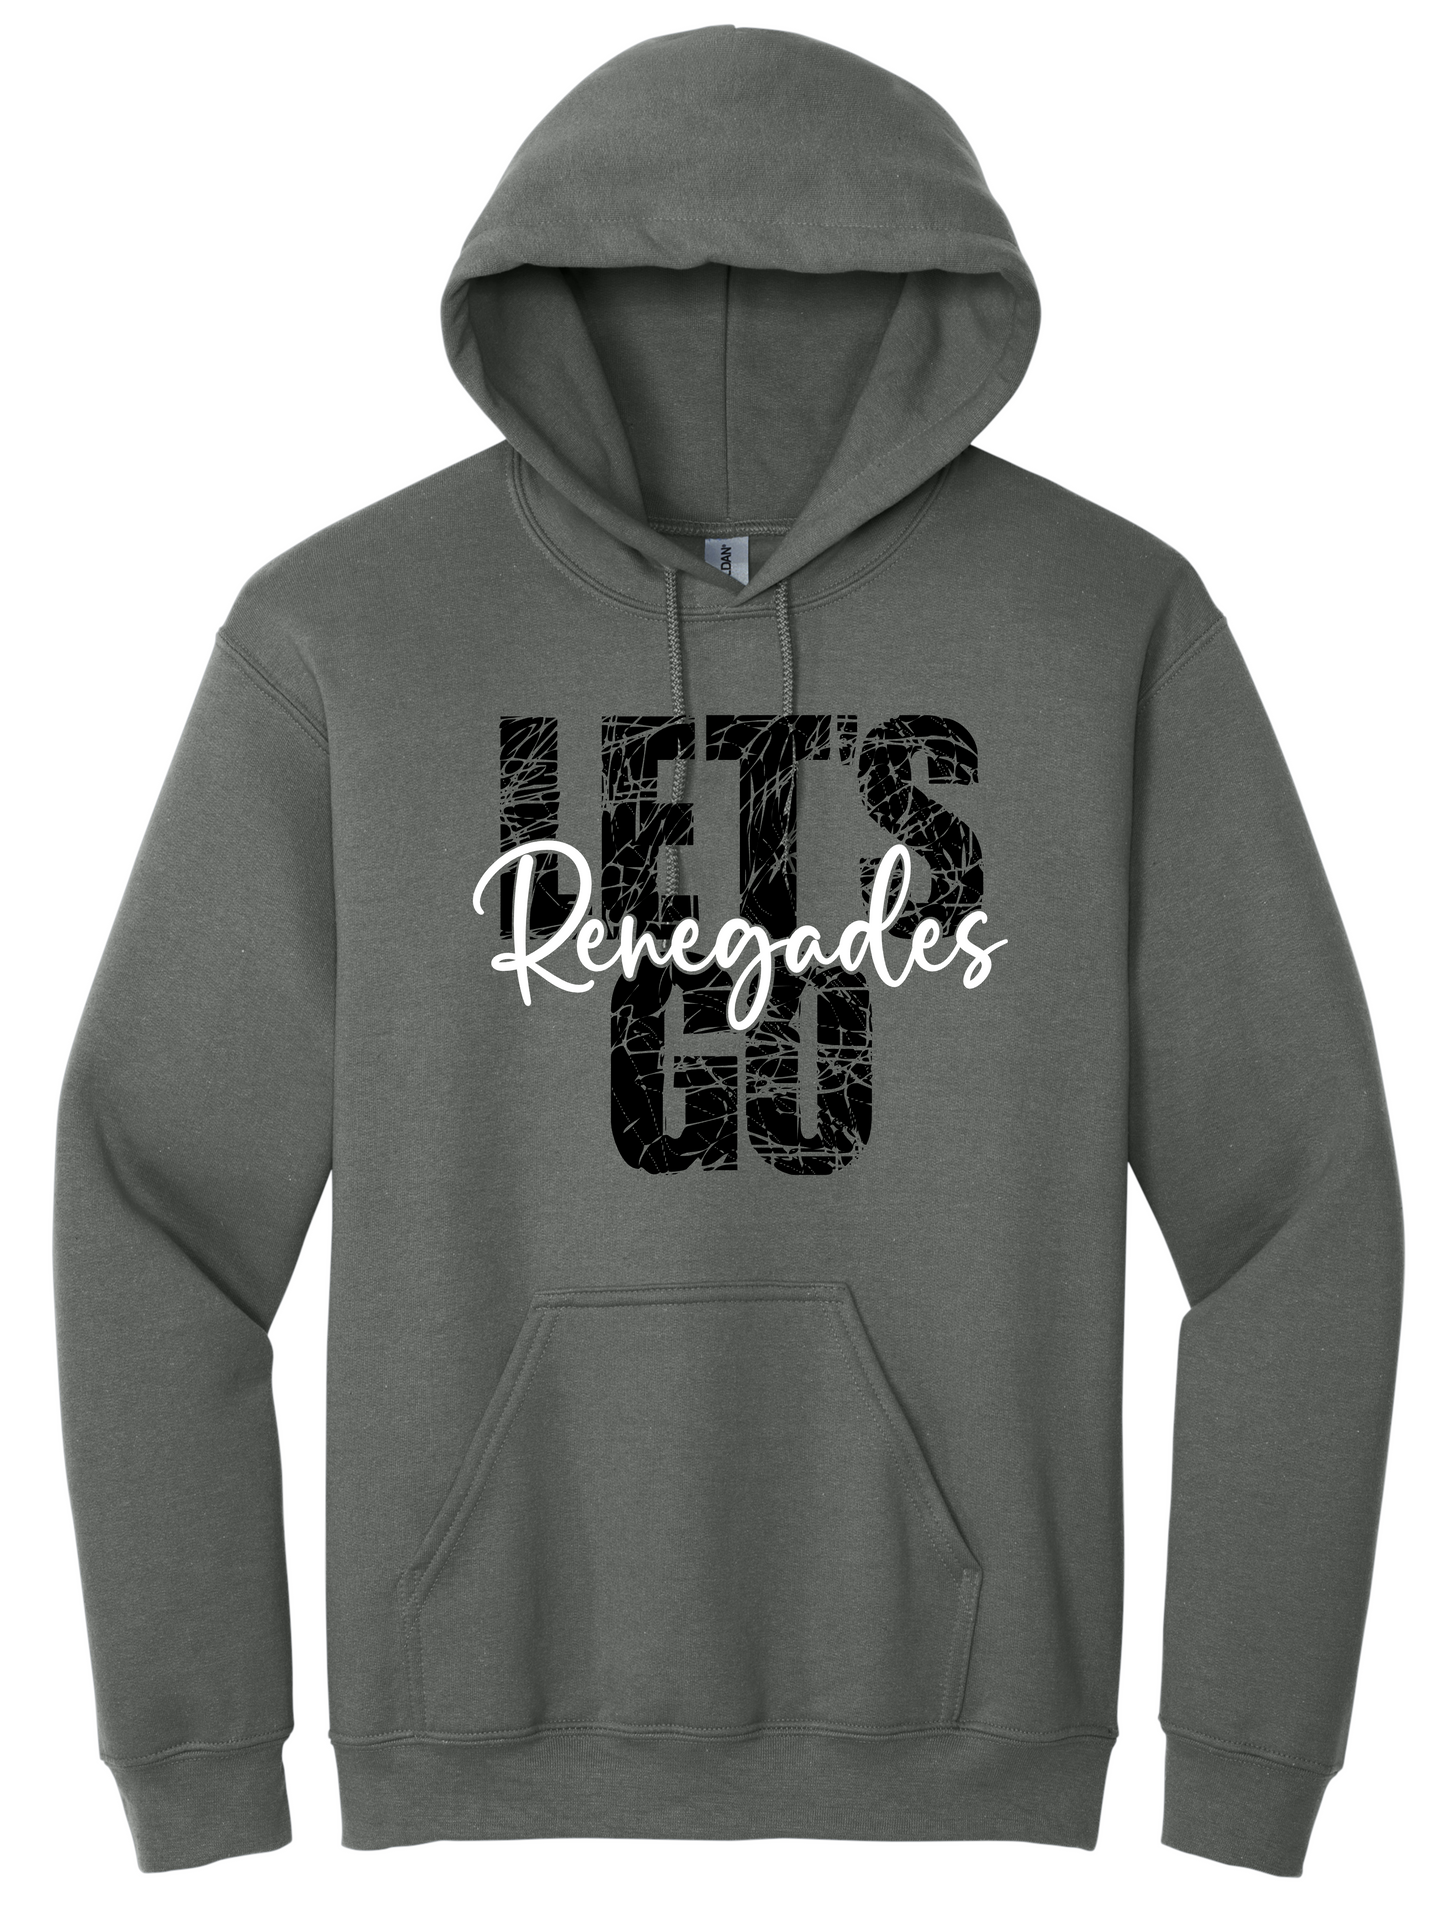 Let's Go Renegades Hoodie - Charcoal